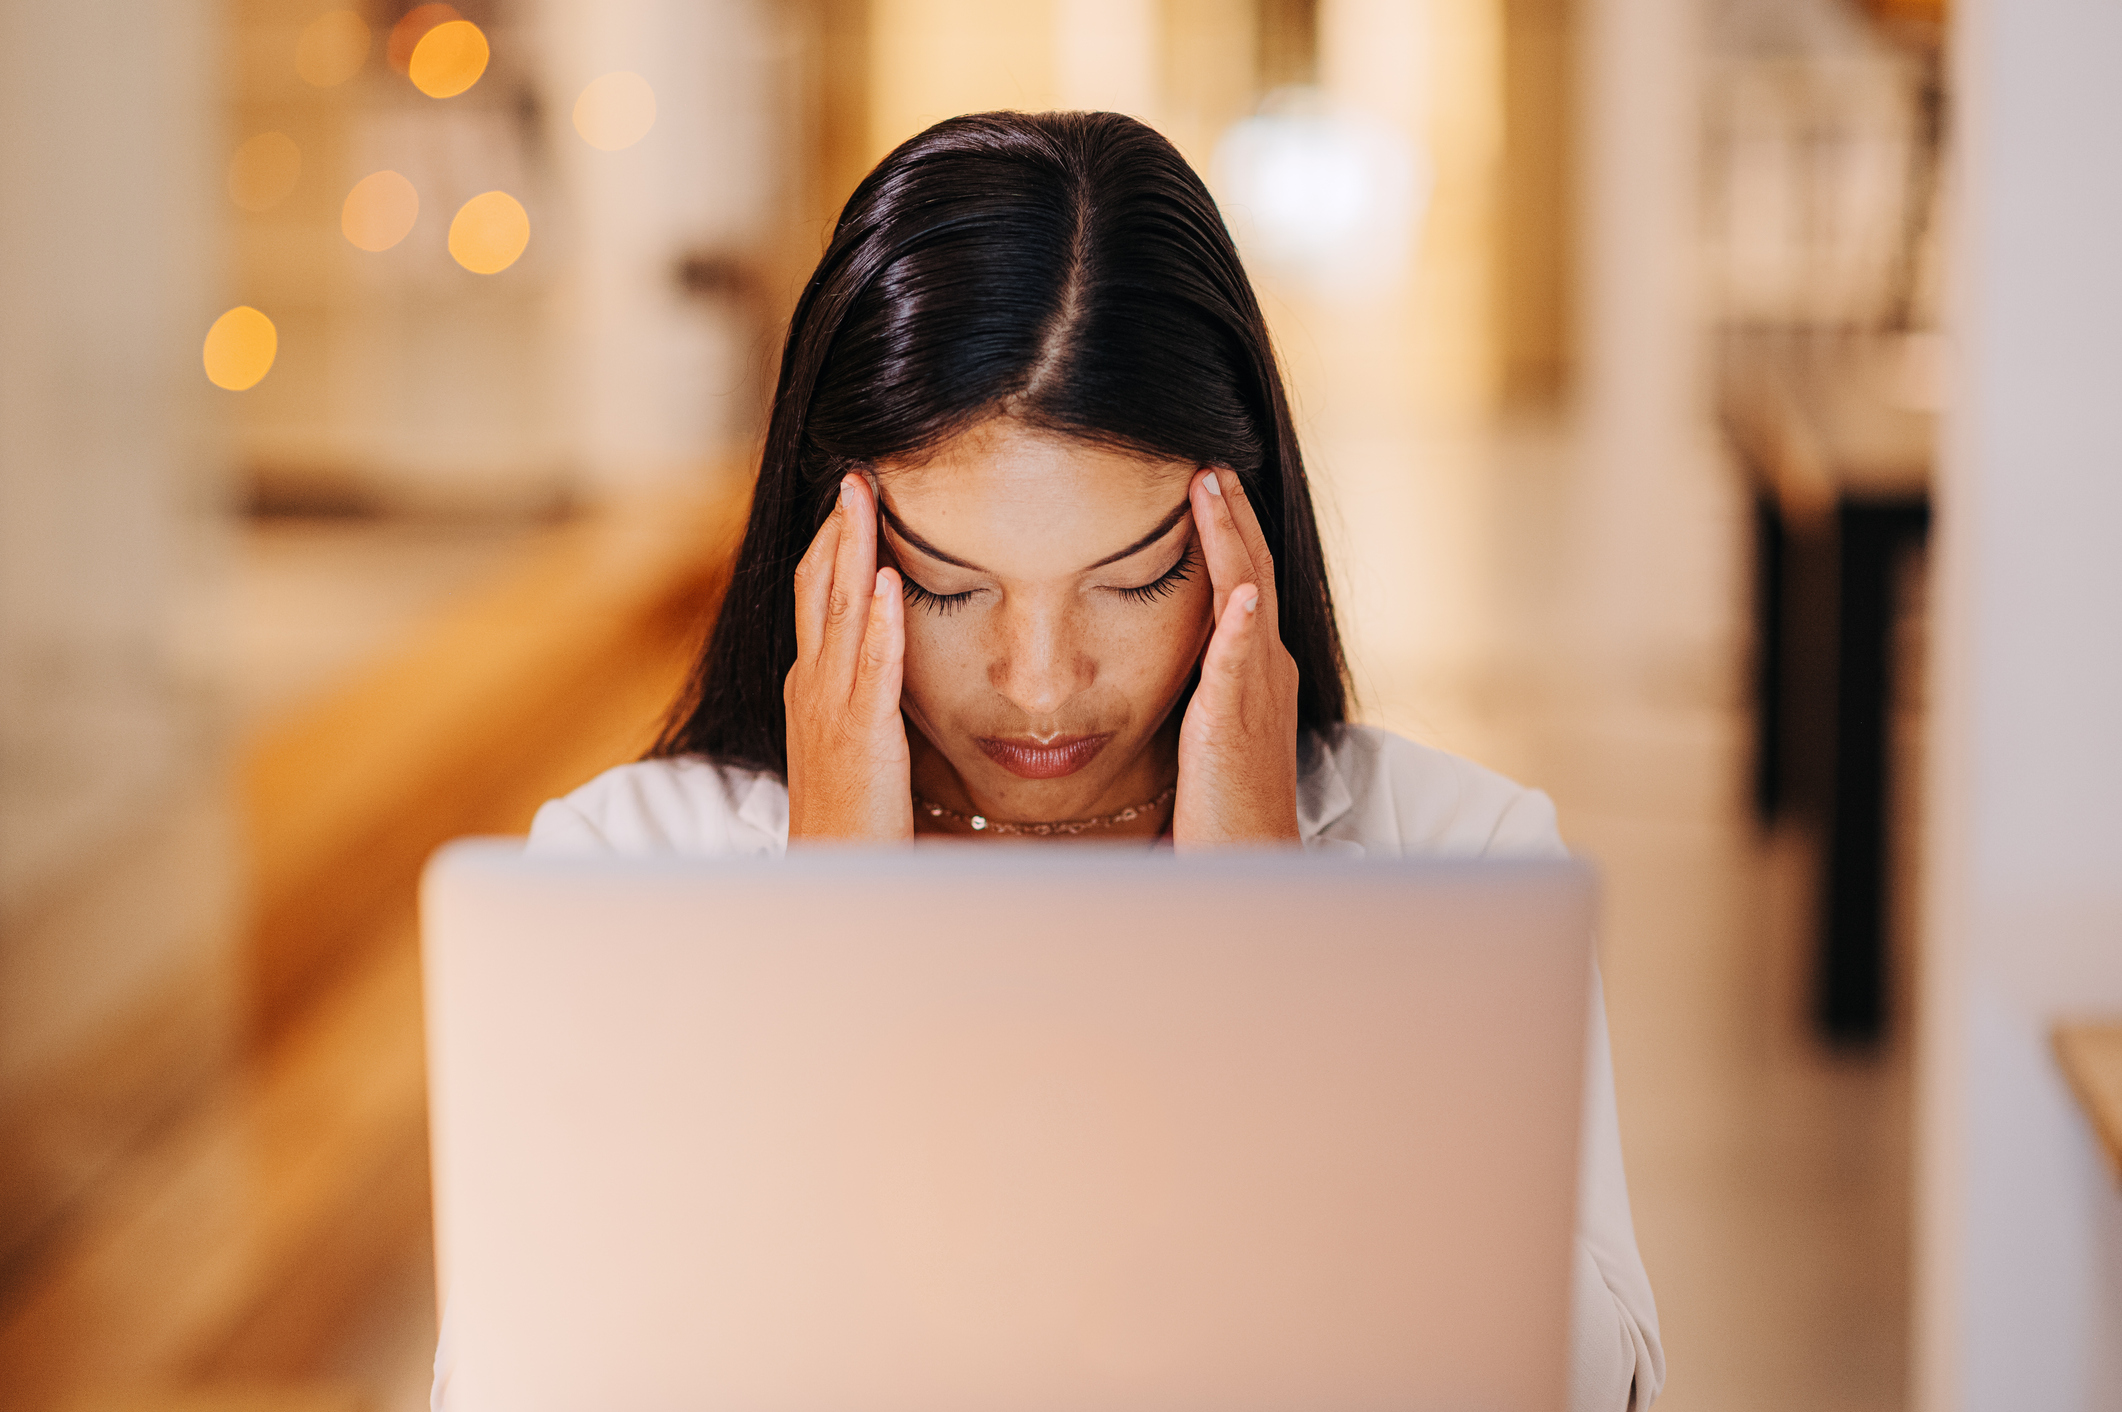 Headache, burnout and stress for woman on laptop doing a social media content writing, internet newspaper or blog article. Home, migraine and freelance writer working to meet target story deadline